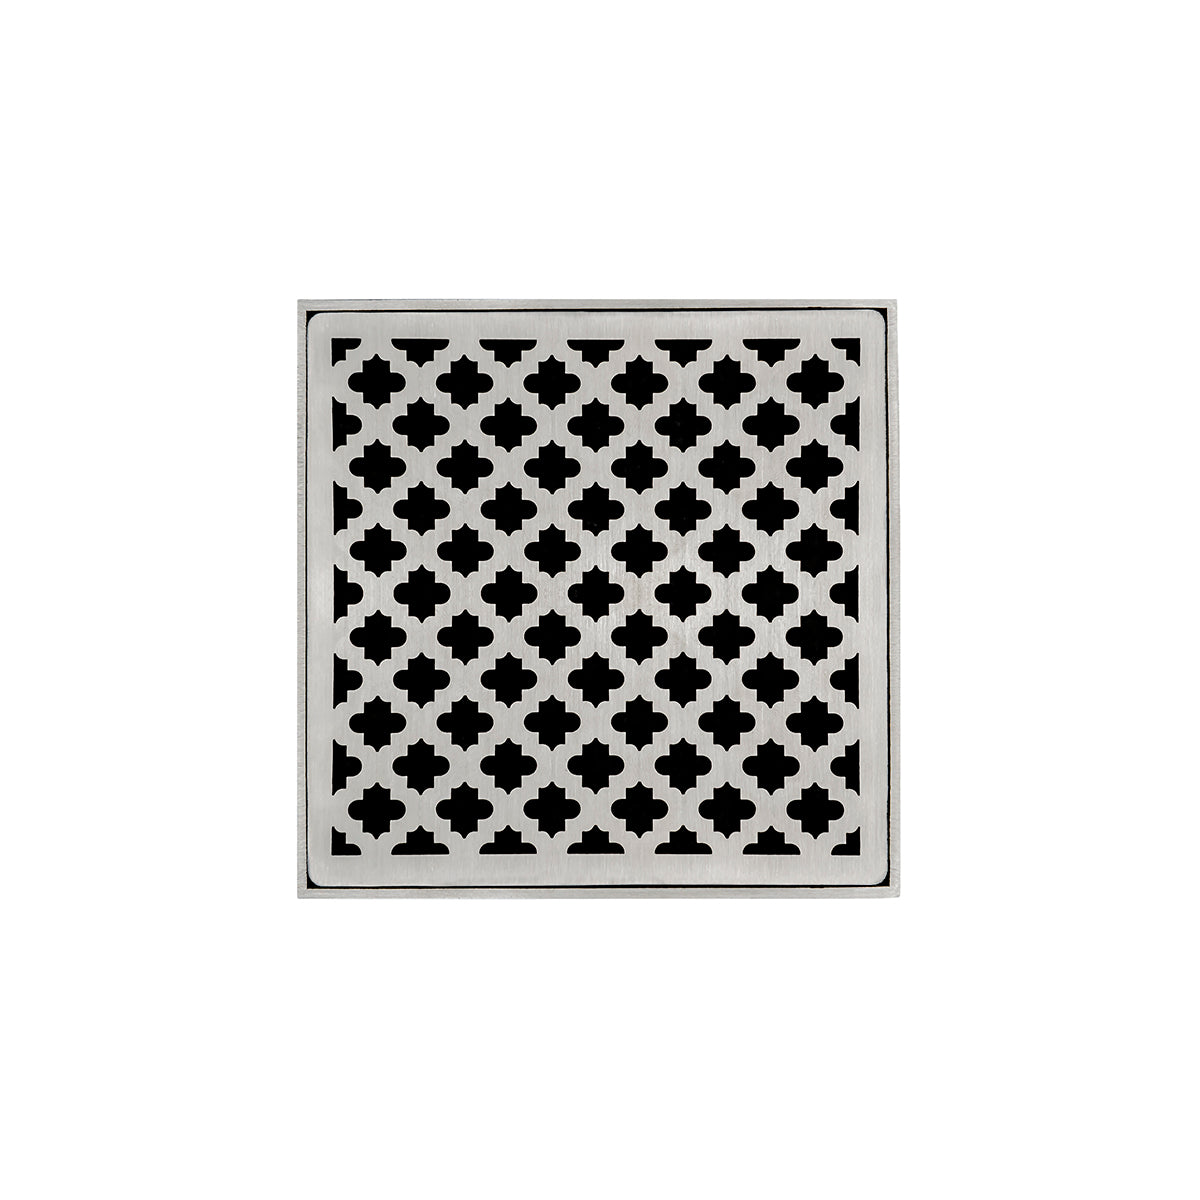 Infinity Drain 5" x 5" Strainer Premium Center Drain Kit with Moor Pattern Decorative Plate and 2" Throat for MD 5